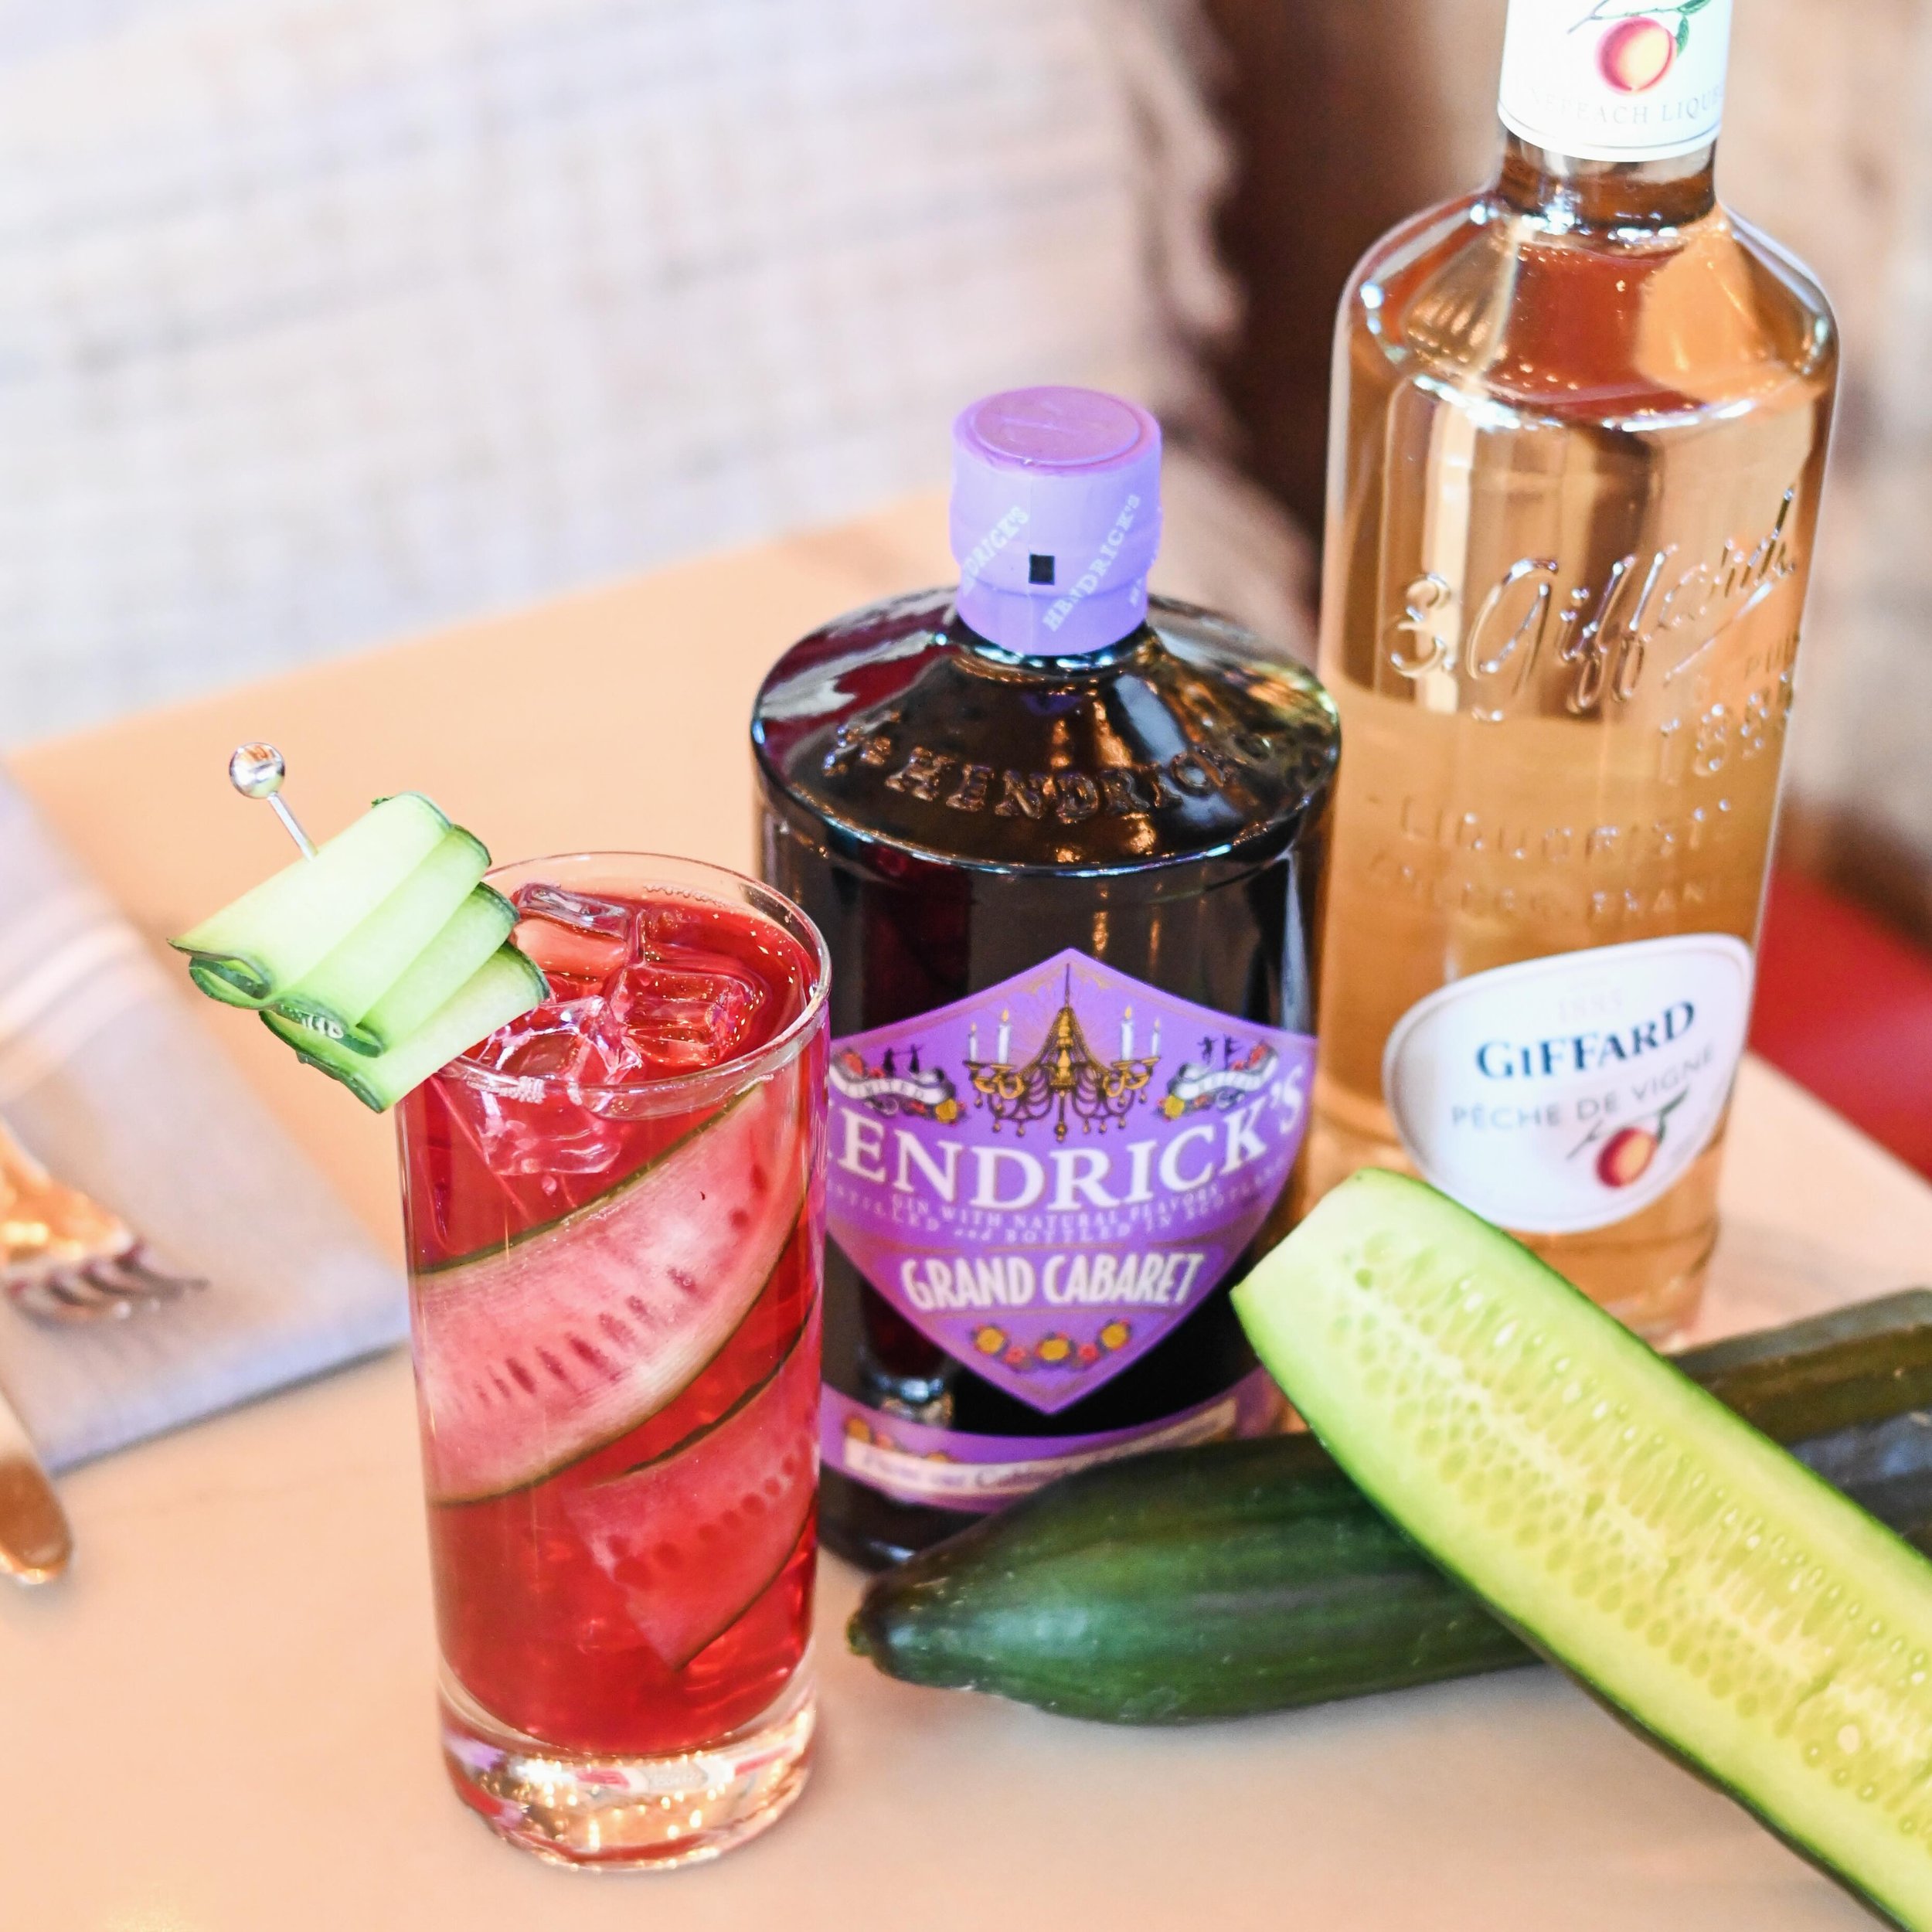 Spring Cocktails have officially arrived, and who doesn&rsquo;t love a good sequel. Meet 2Patio 2Pounder - another delicious gin and cucumber cocktail, featuring Hendricks Grand Cabaret, Giffard Peach, and a house-made Hibiscus-Lime cordial! 🍑🥒